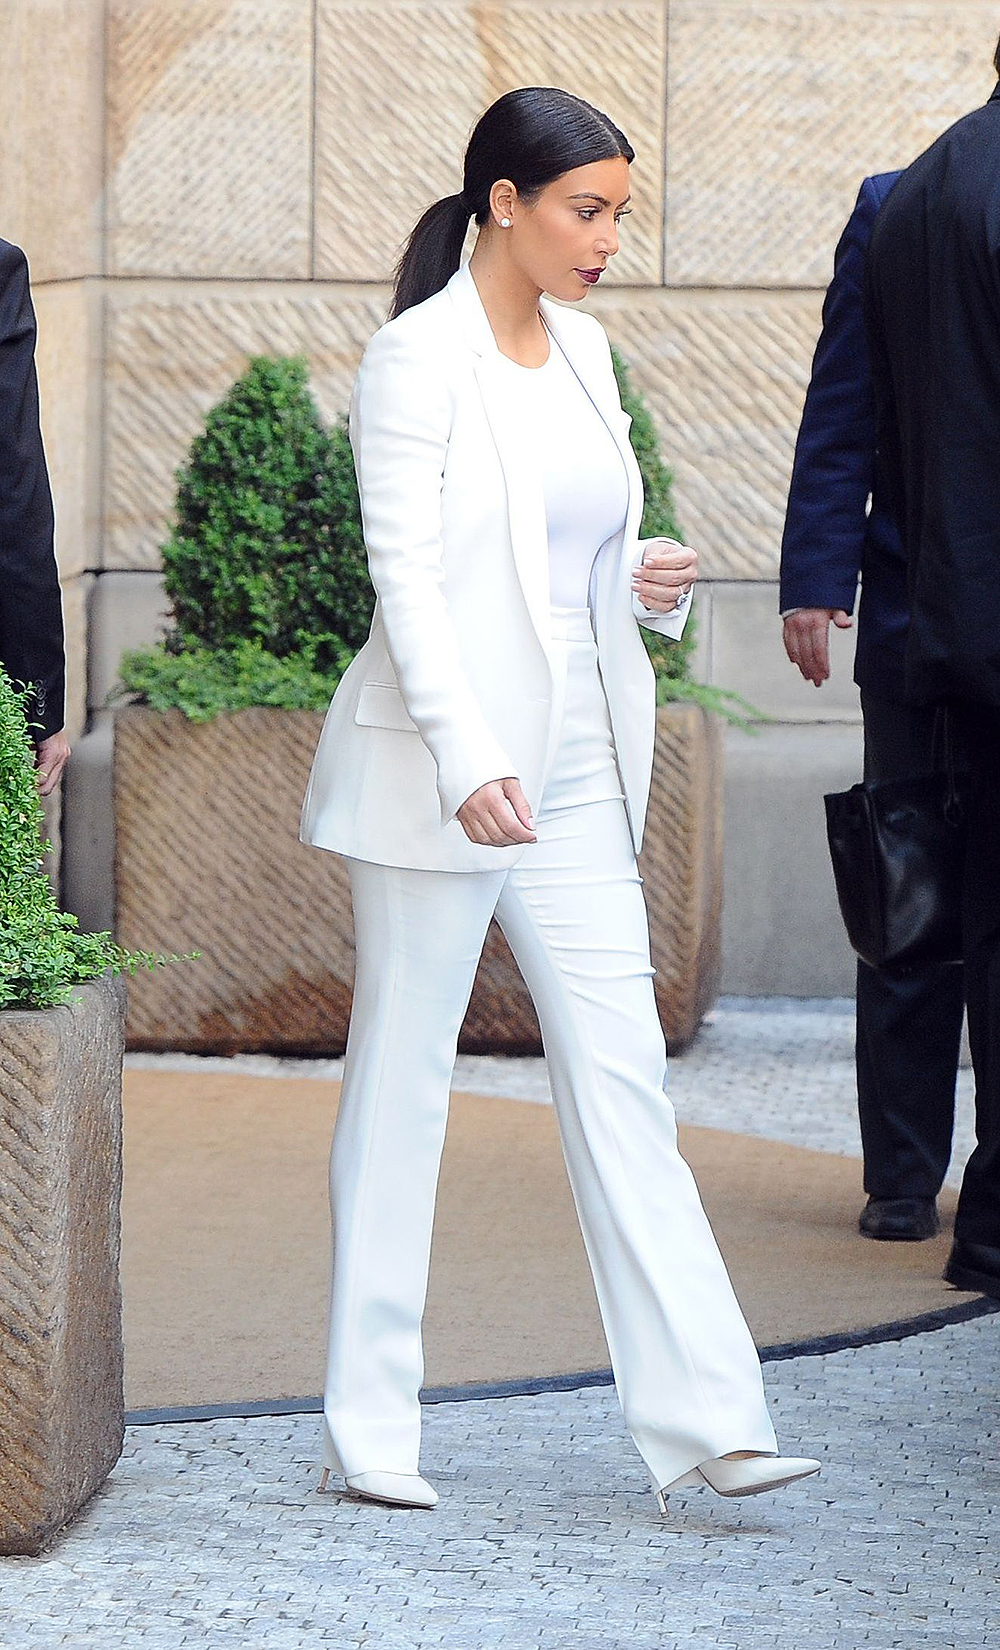 Women in Suits - Female Celebrities in Pant Suits and Tuxedos